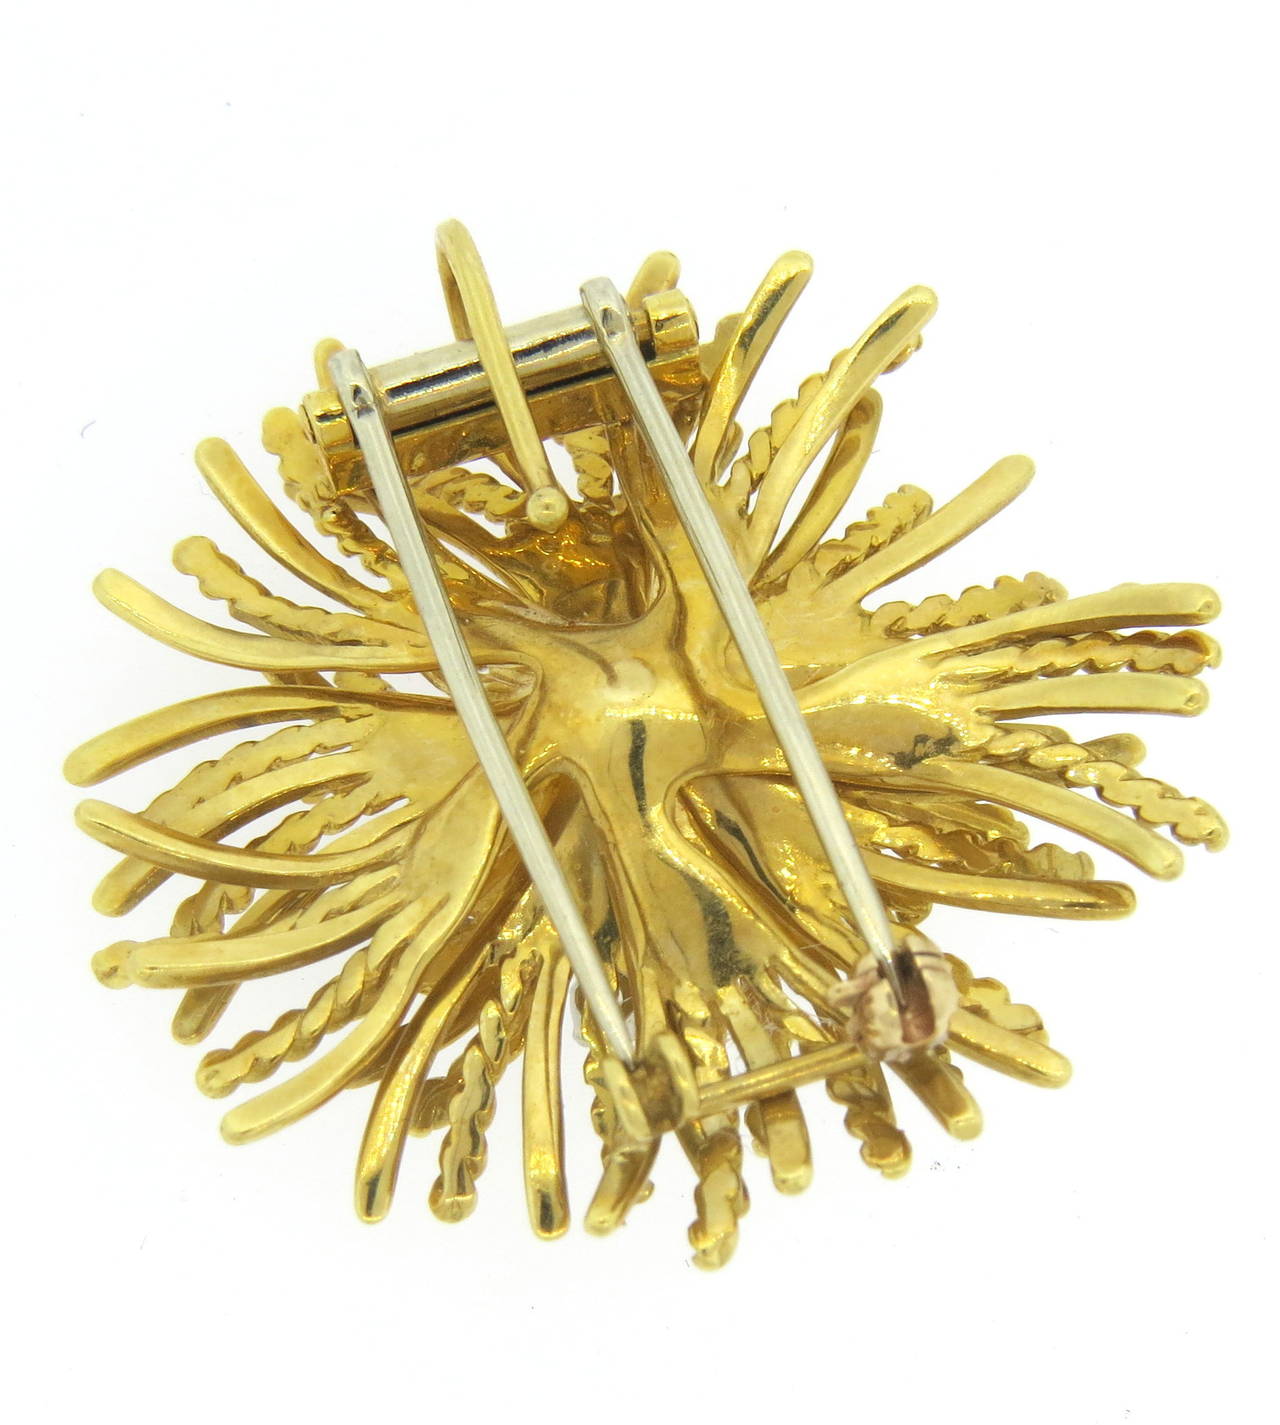 18k gold brooch pendant by McTeigue, set with approximately 0.60ctw in G/VS diamonds. Brooch measures40mm in diameter. Marked with makers mark and 18k. weight of the piece - 25 grams